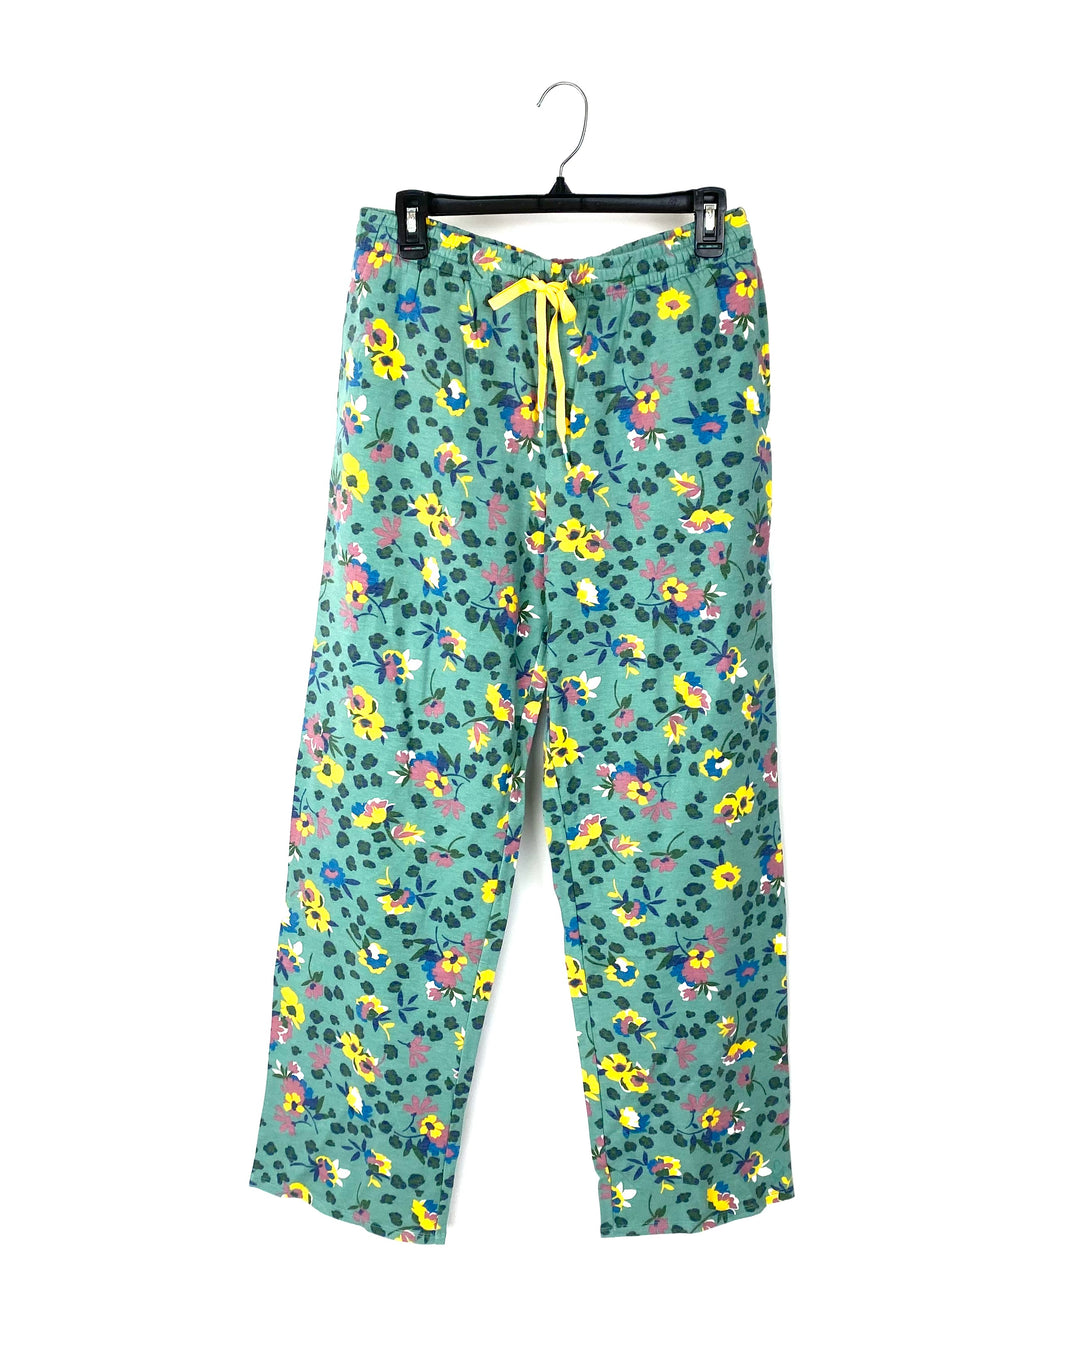 Green Floral Sweatpants - Small